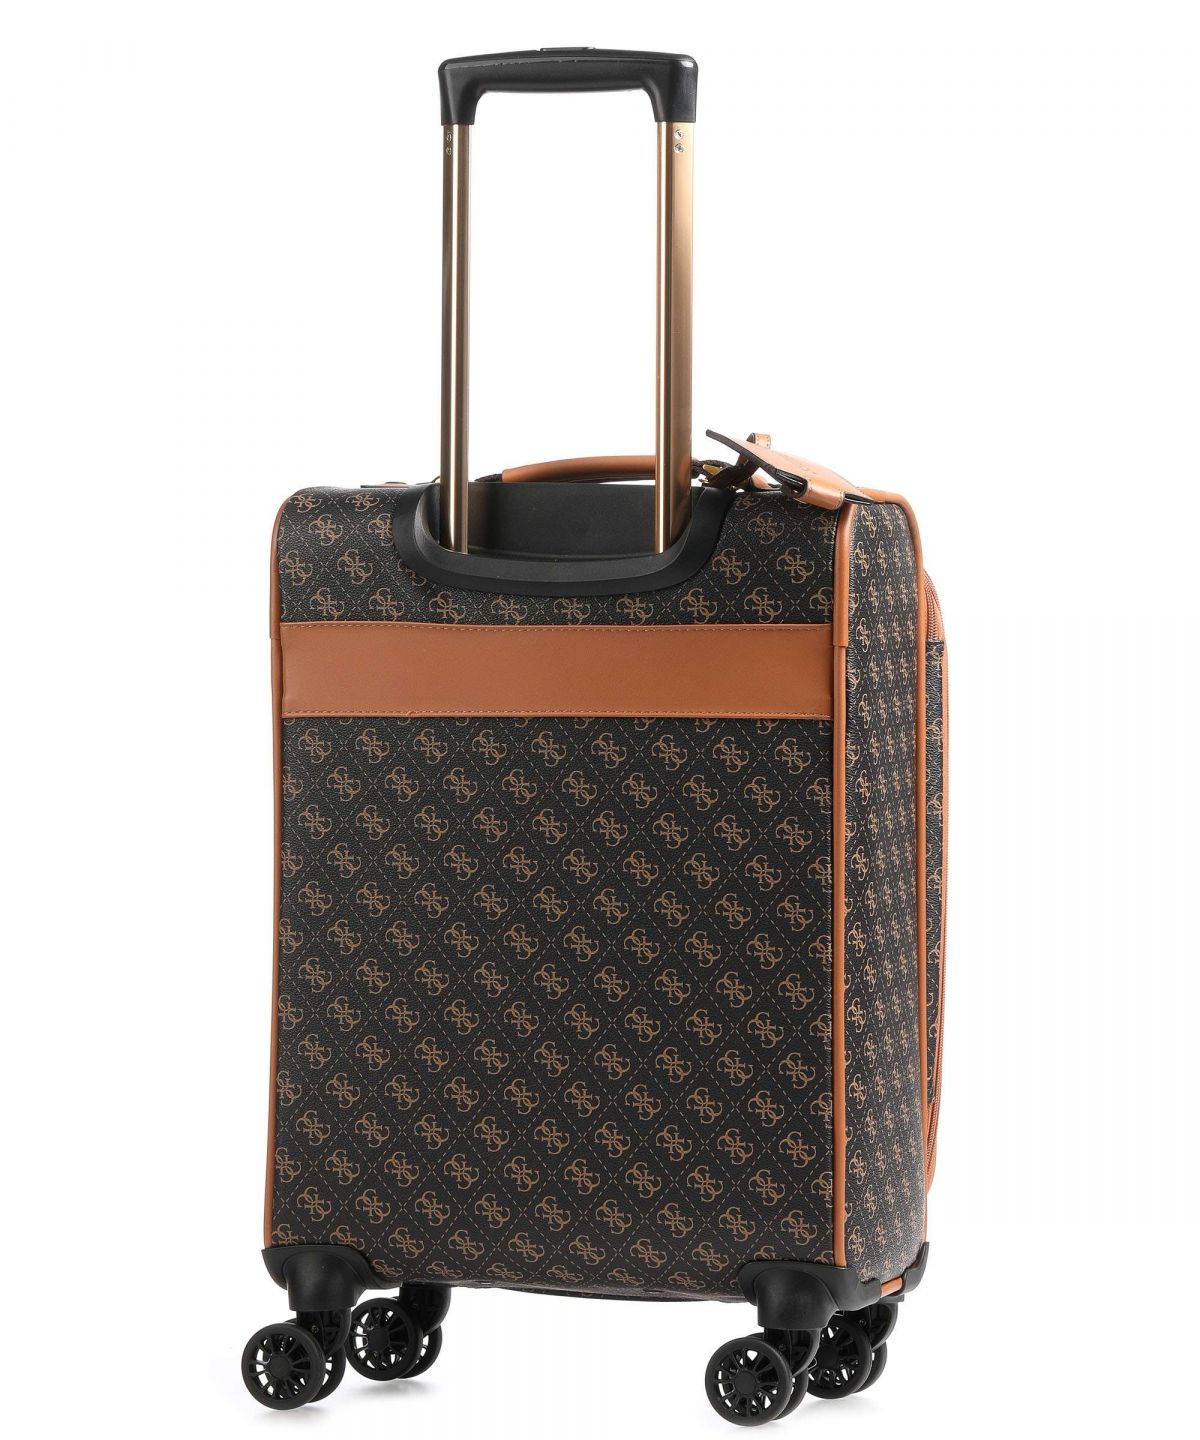 Guess trolley suitcase TWE84059830